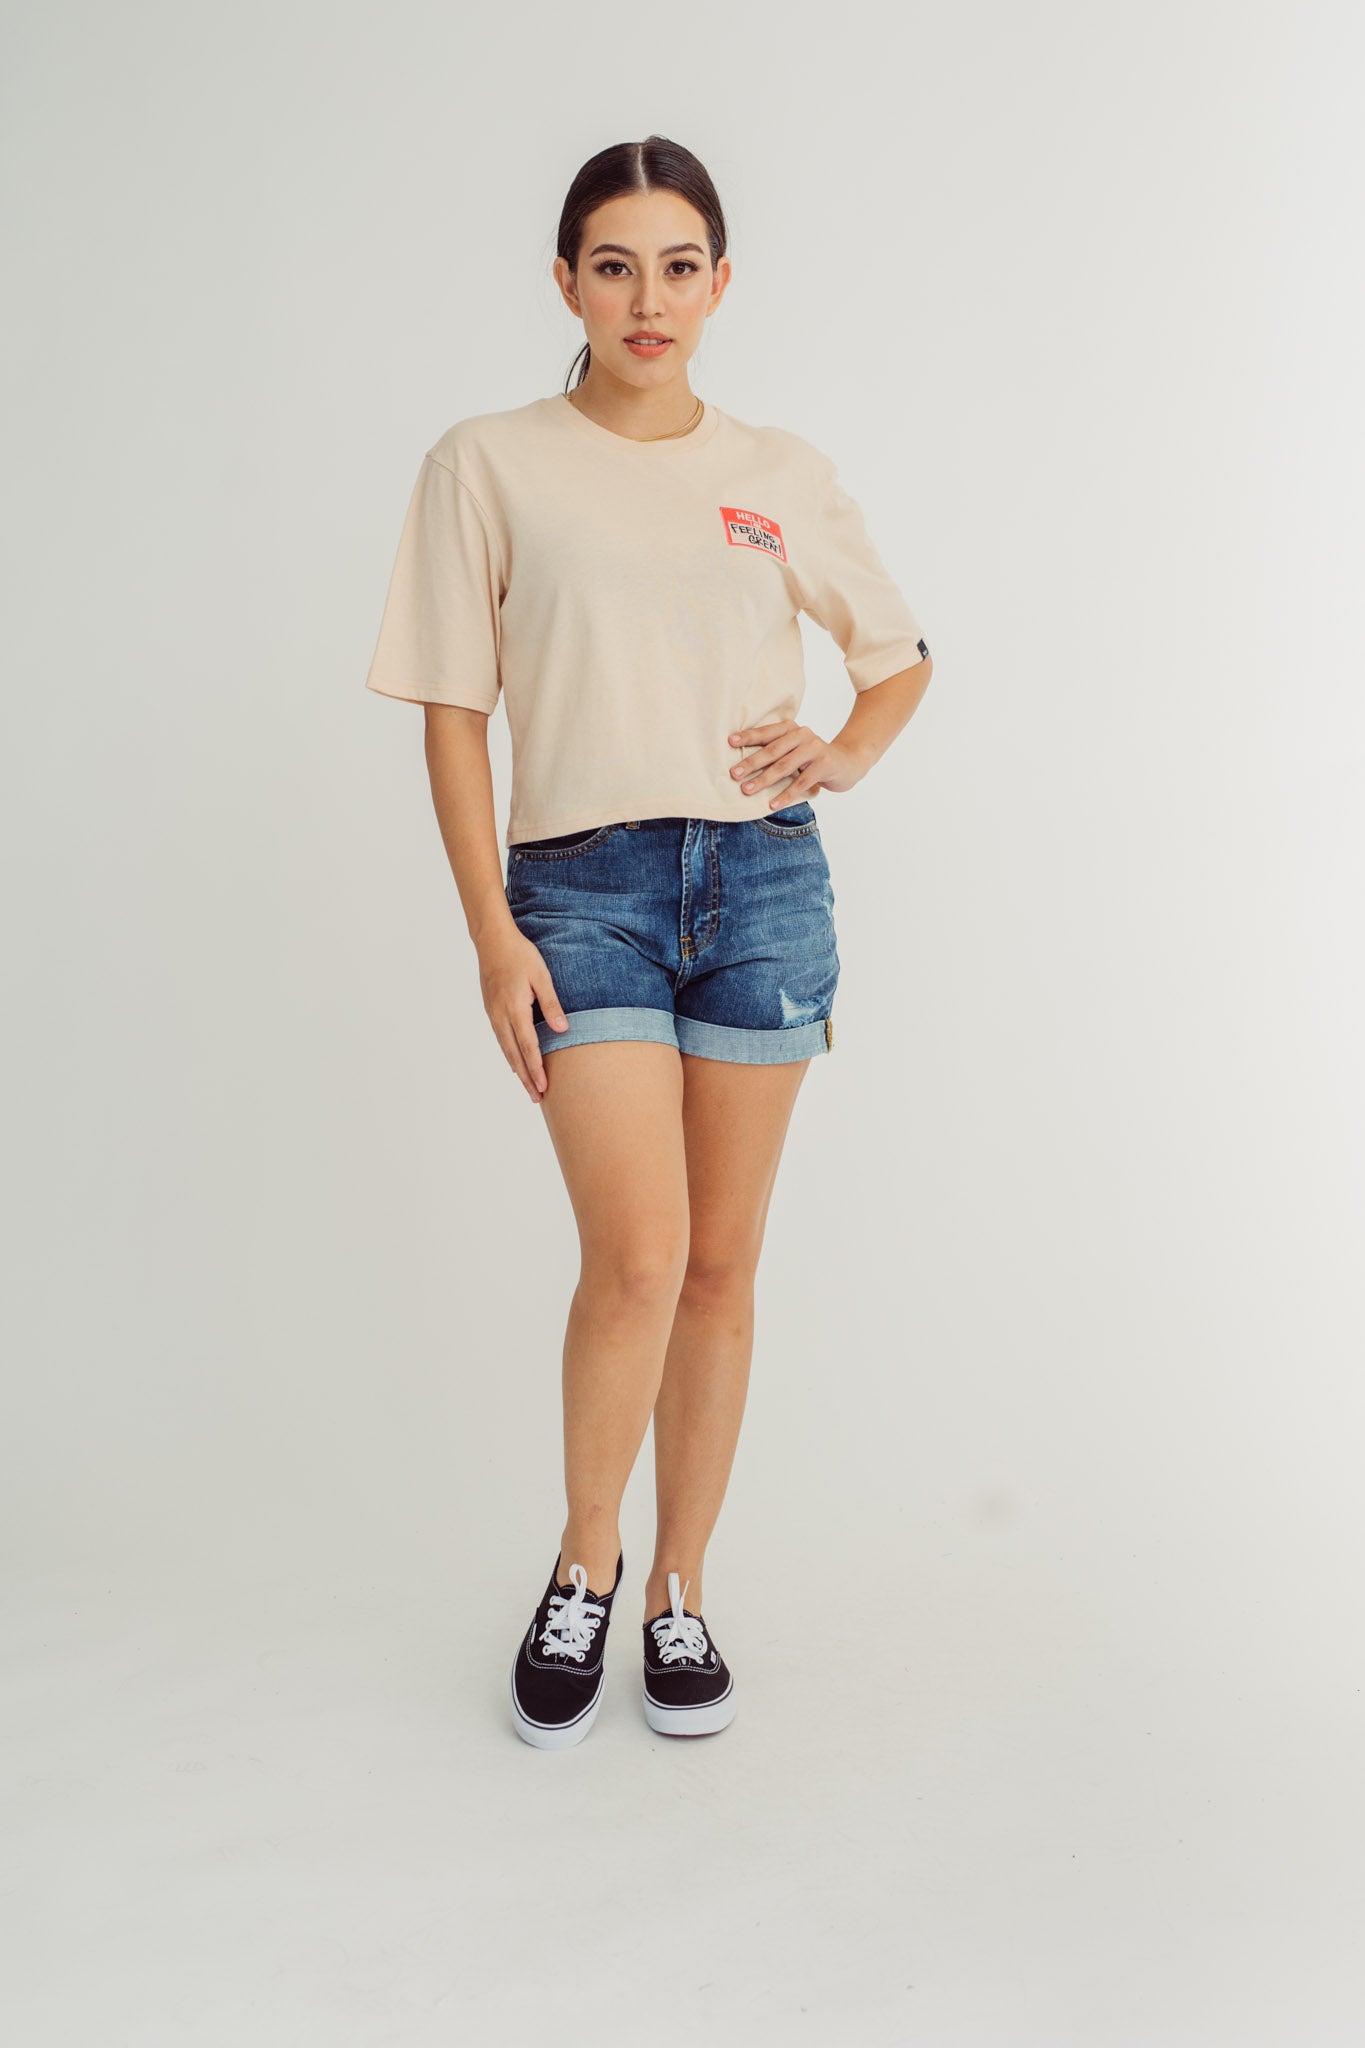 Ivory Cream with Statement Patch Embroidery Modern Cropped Fit Tee - Mossimo PH